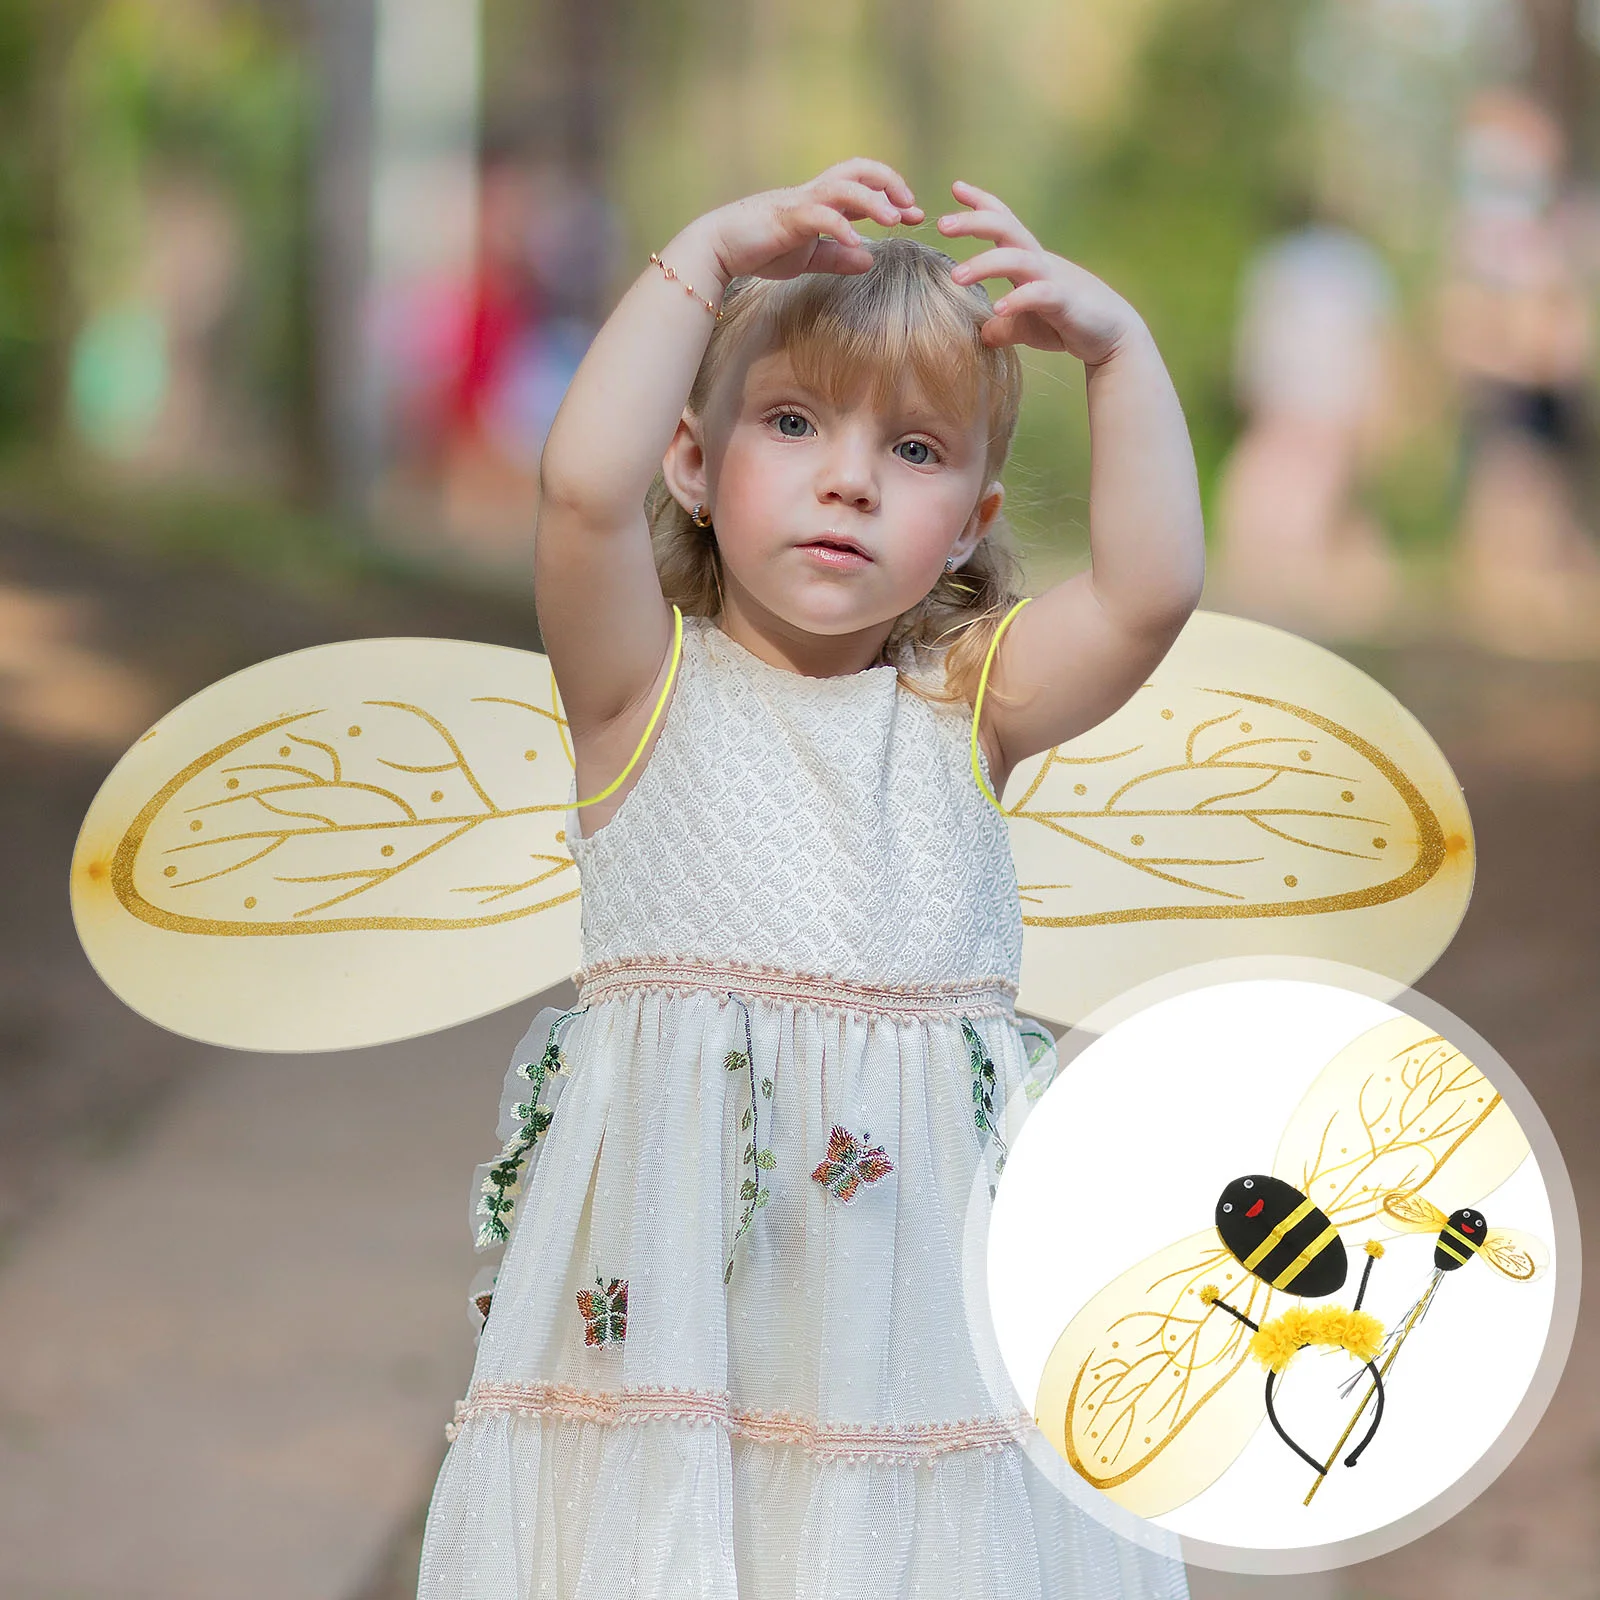 Bee Wings Set Kids Costume Wand for Party Accessories Cosplay Prop Fabric Dress-up Headband